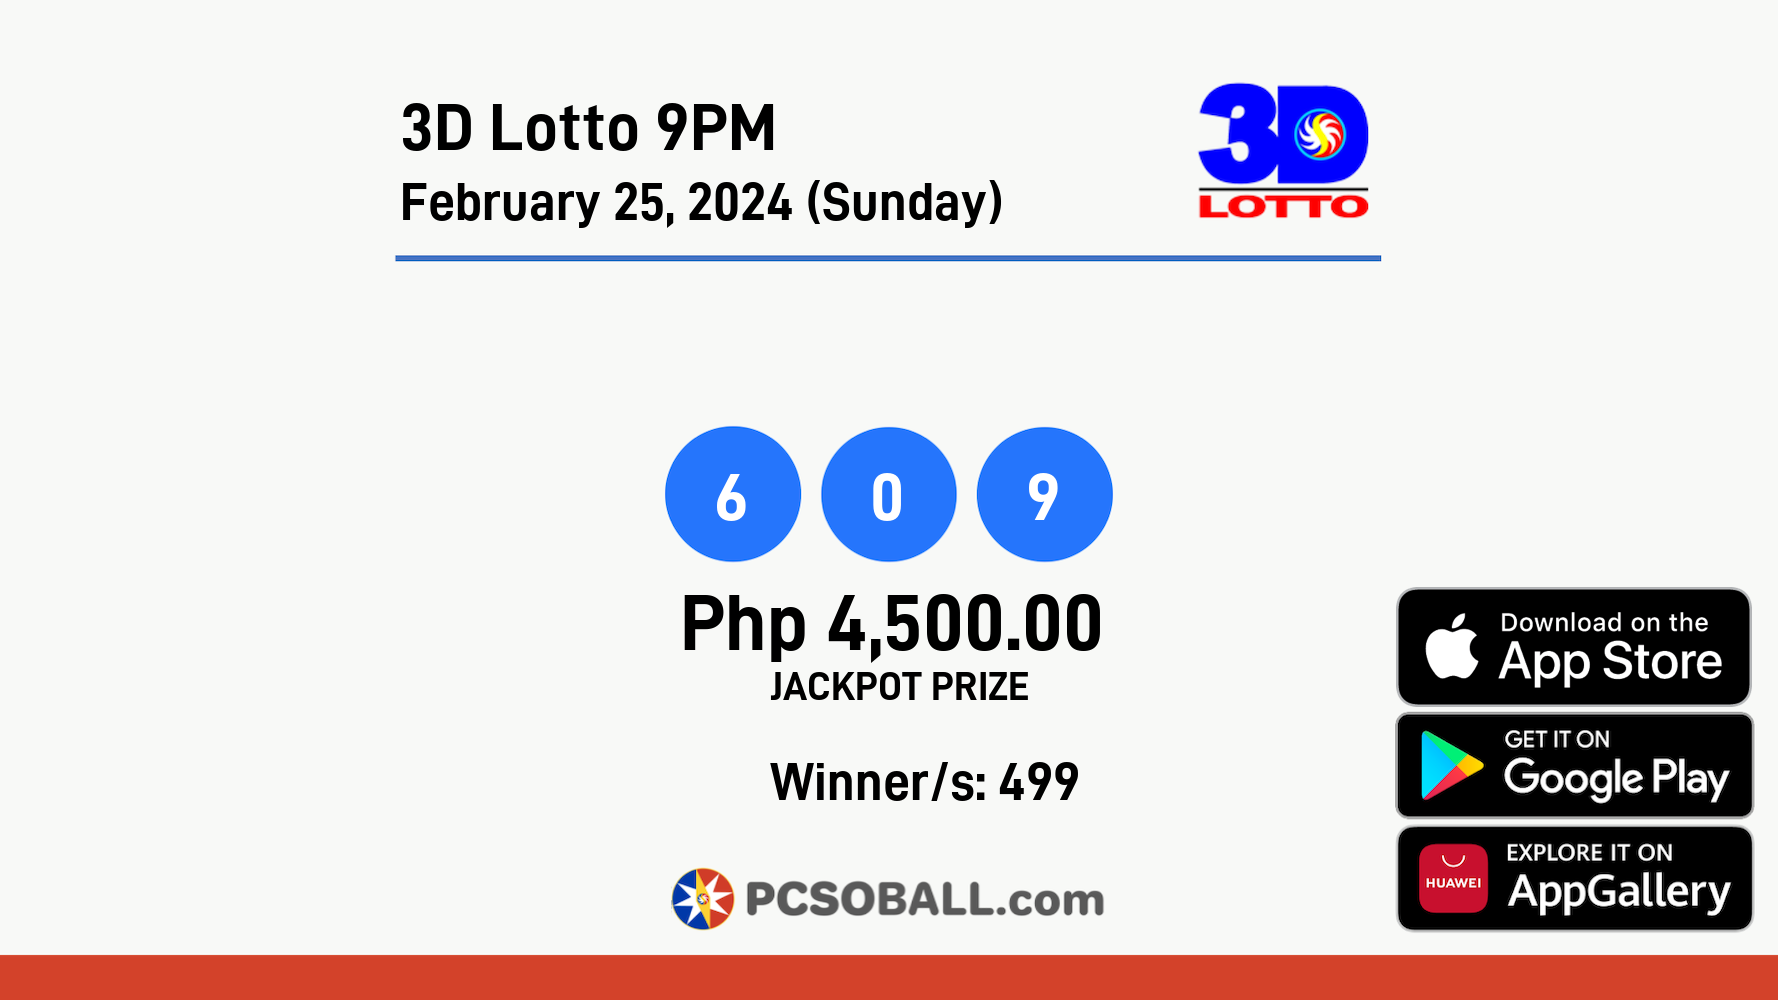 3D Lotto 9PM February 25, 2024 (Sunday) Result